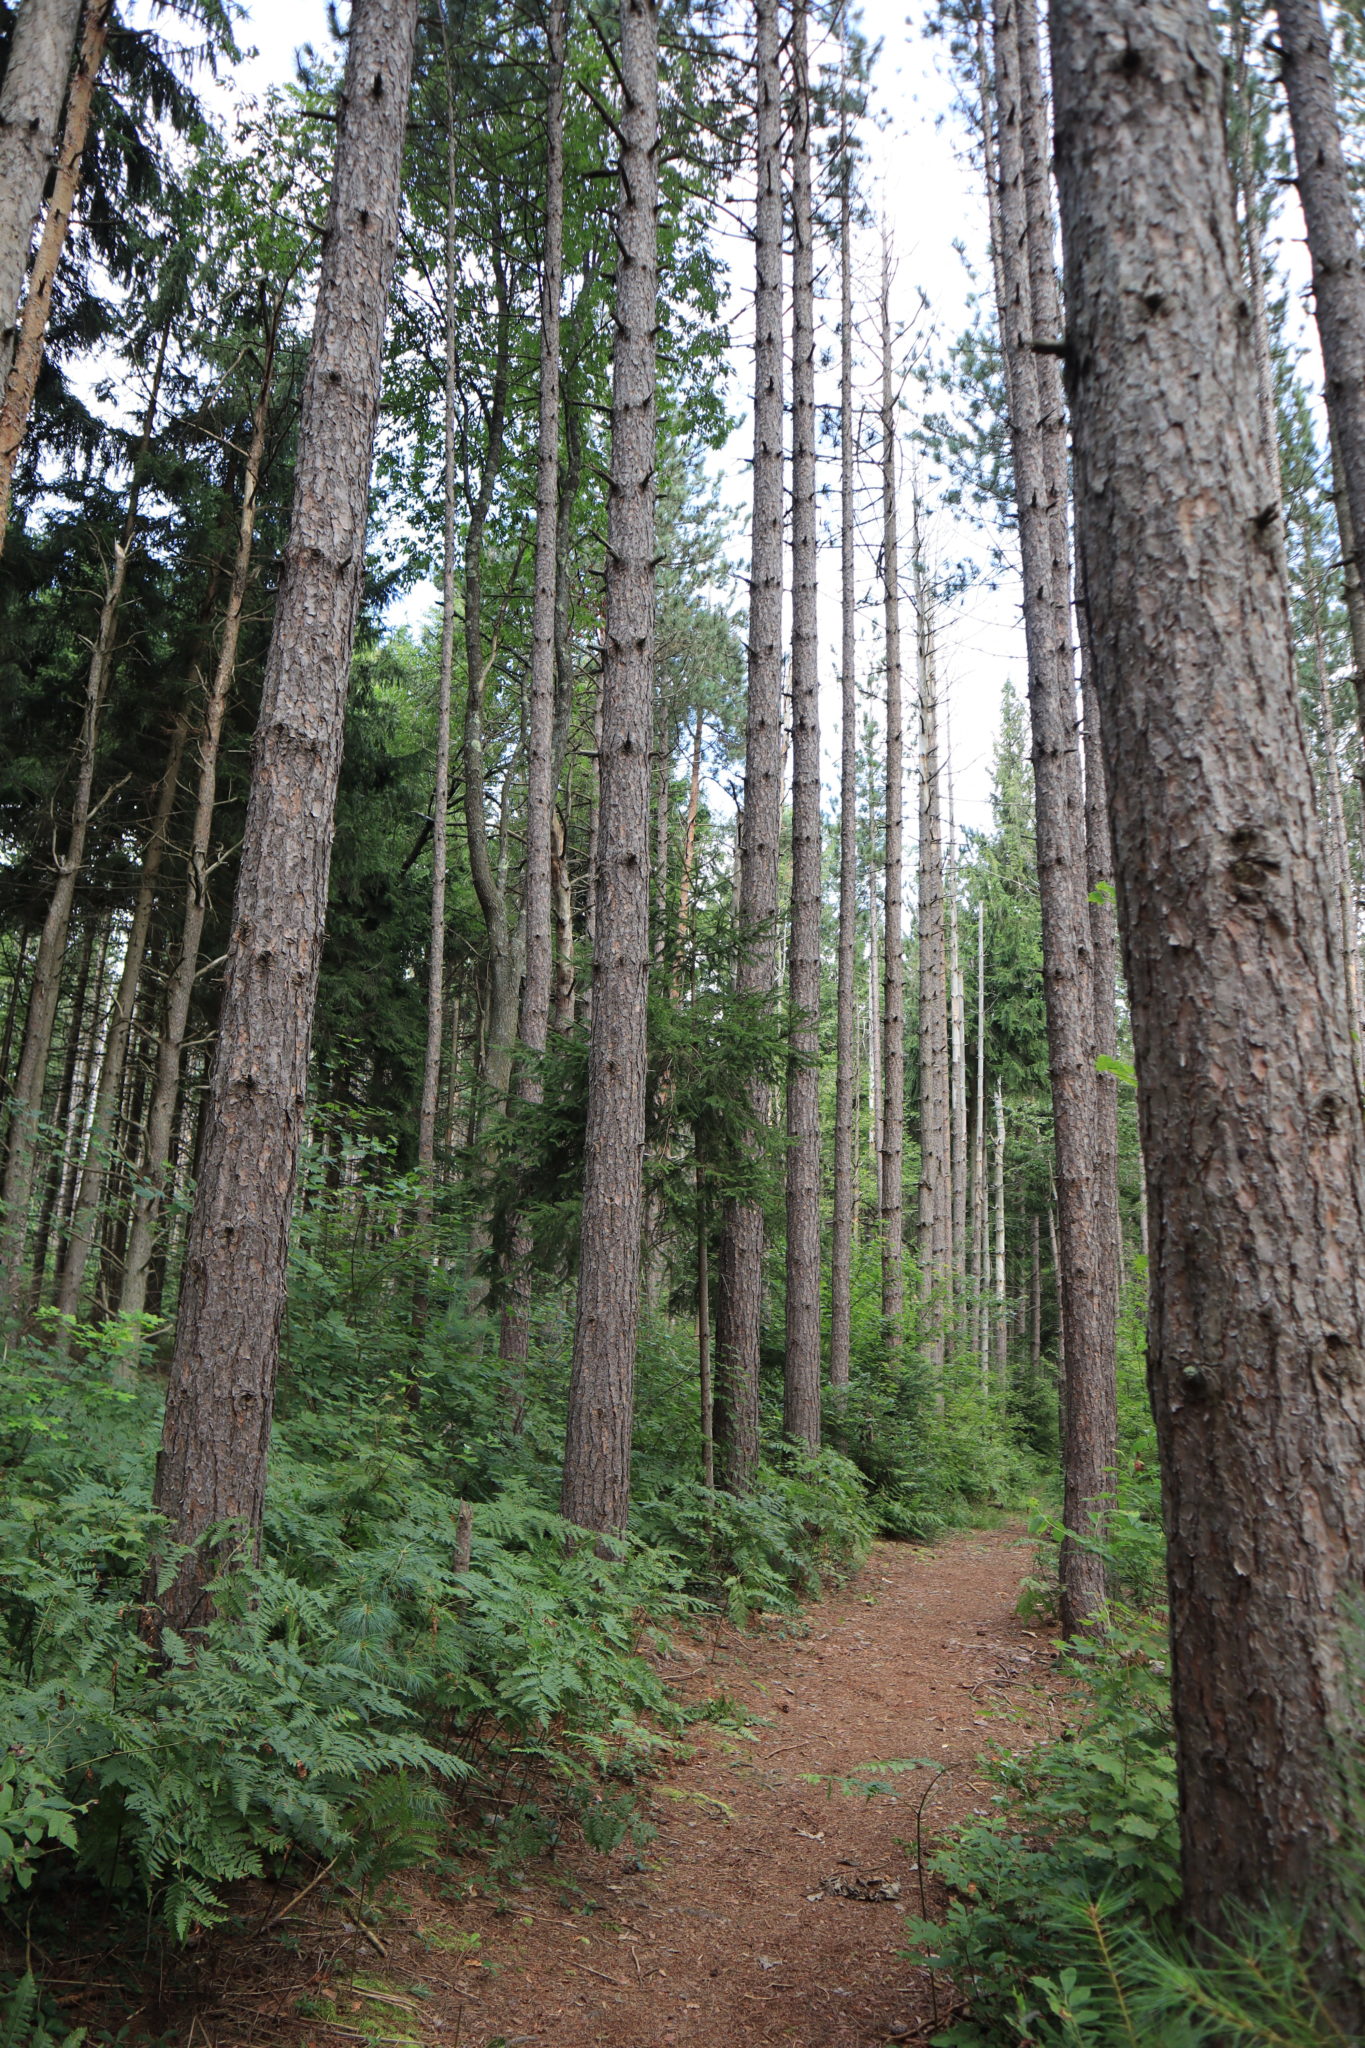 Hiking trail and trees at the Cranesville Swamp near Deep Creek